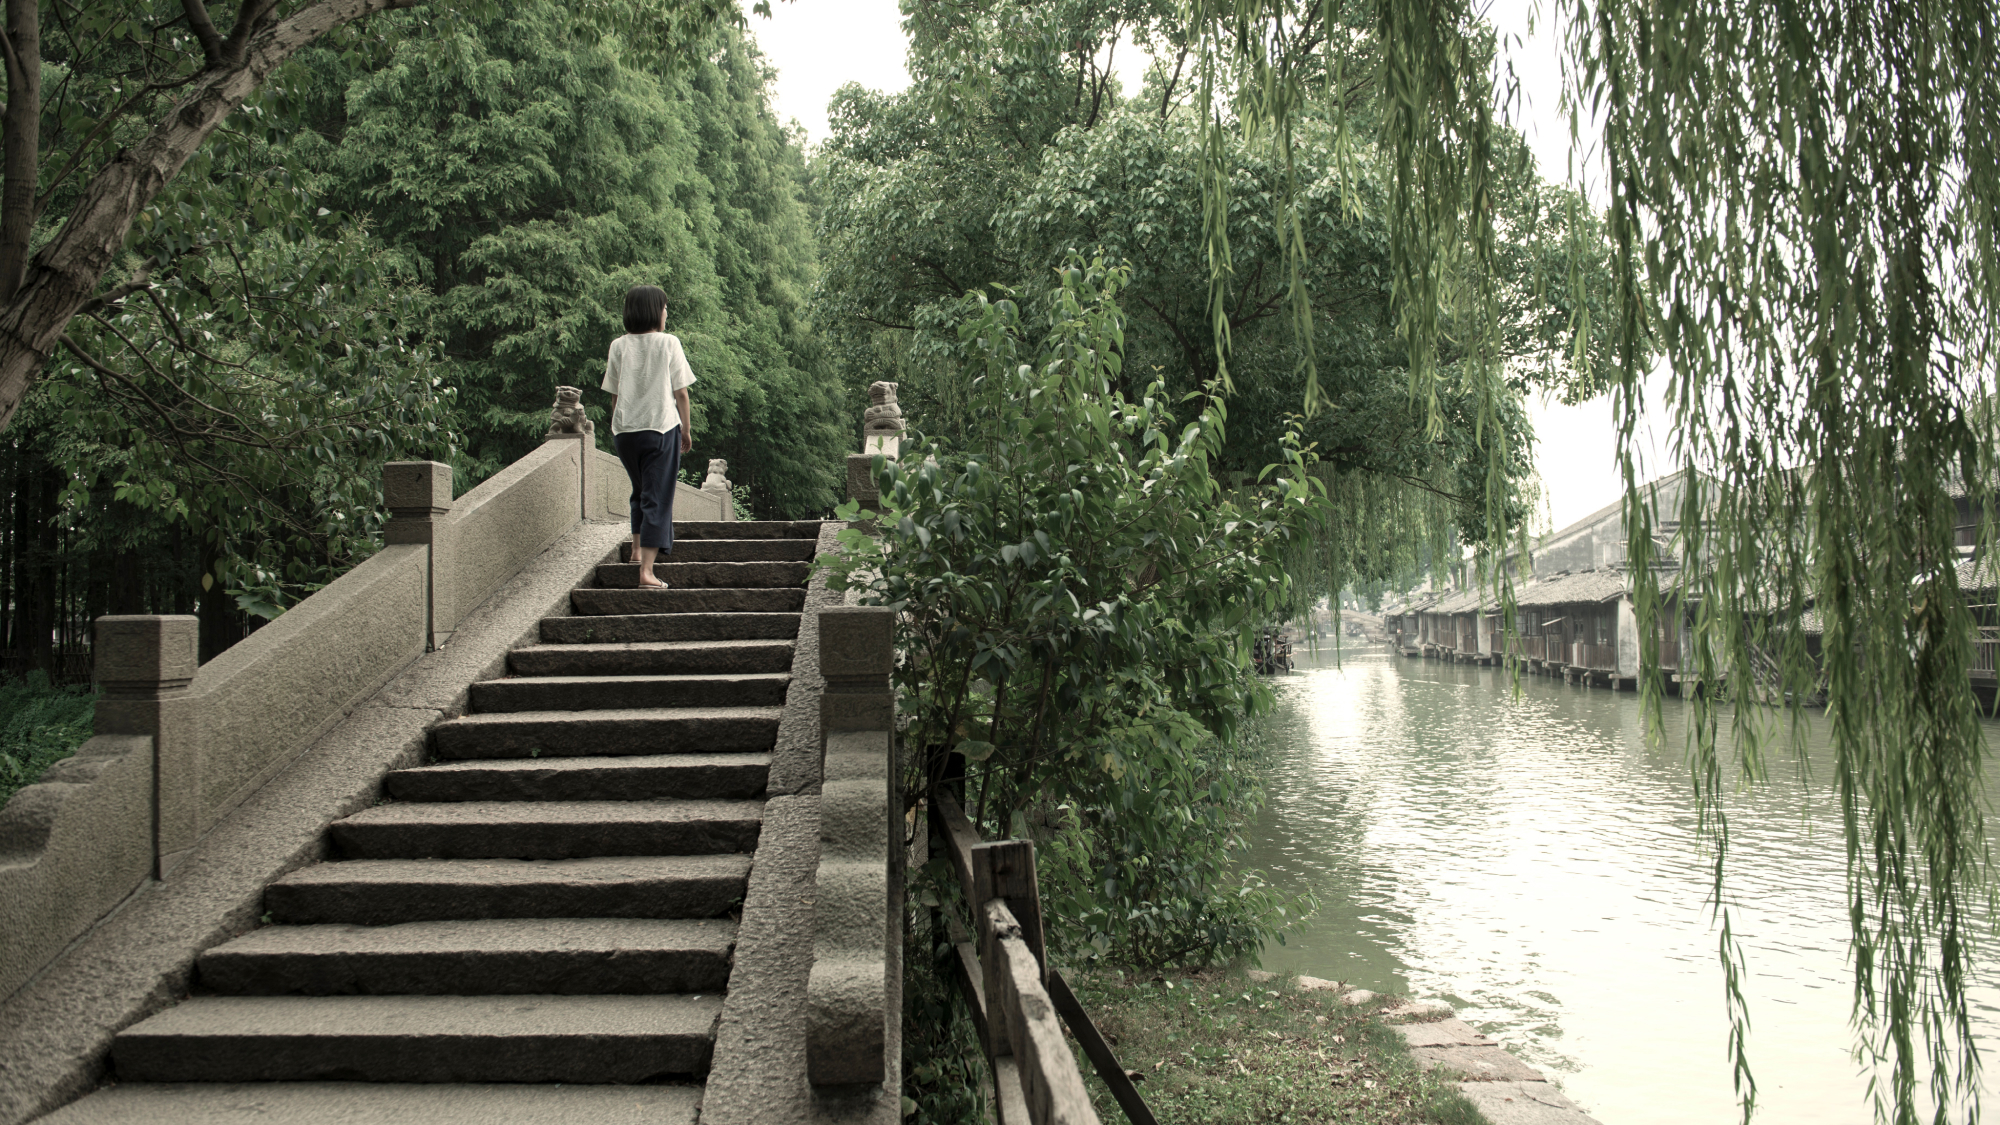 Person walking on staircase next to waterway